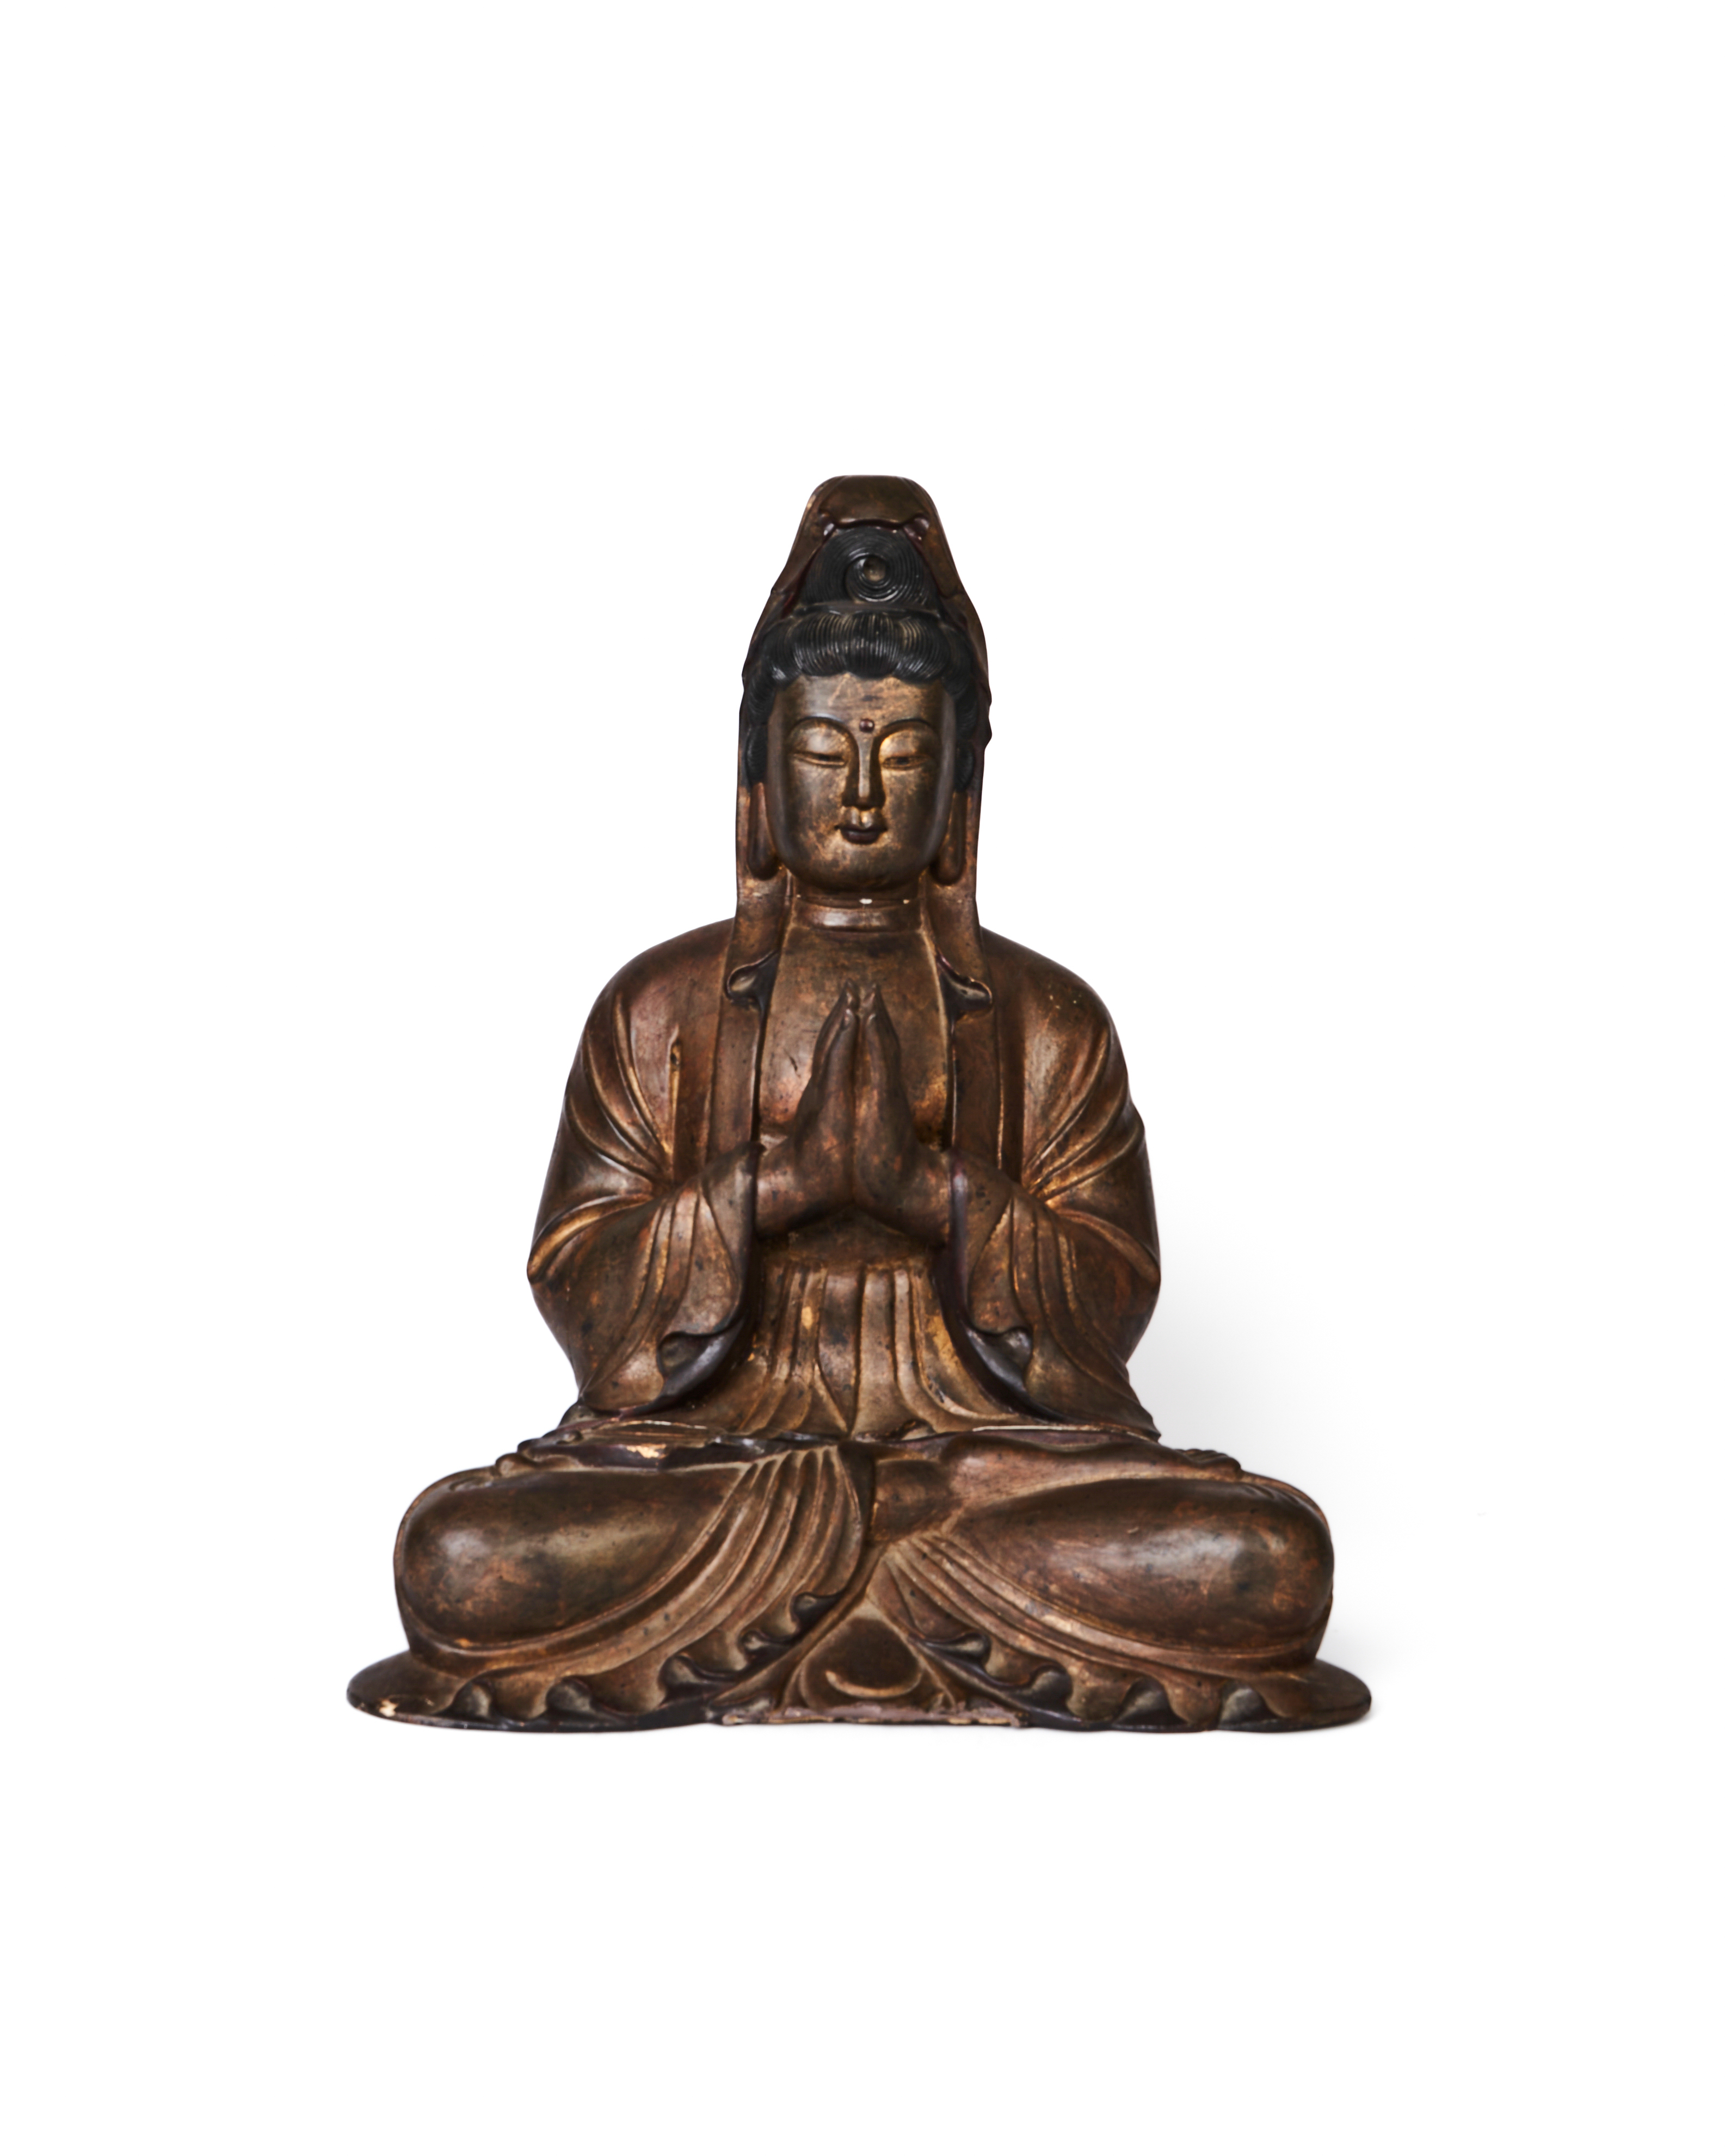 A LARGE CHINESE GILT WOOD FIGURE OF A SEATED GUANYIN, QING DYNASTY (1644-1911)